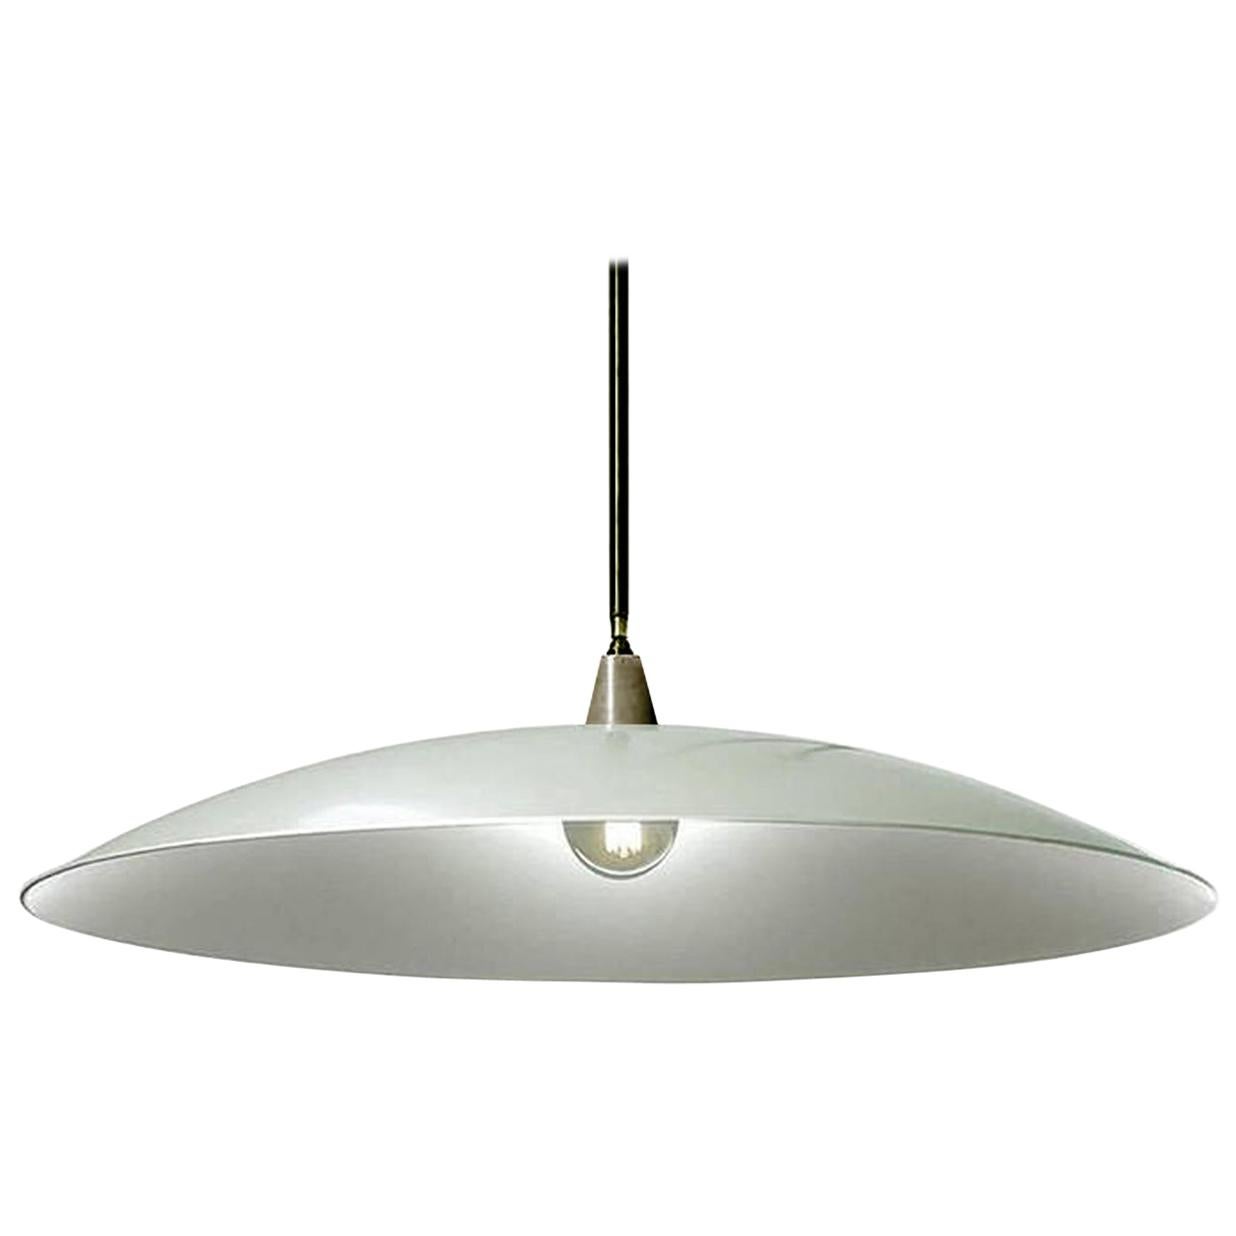 Dramatic Shallow Dish Architects Lamp For Sale